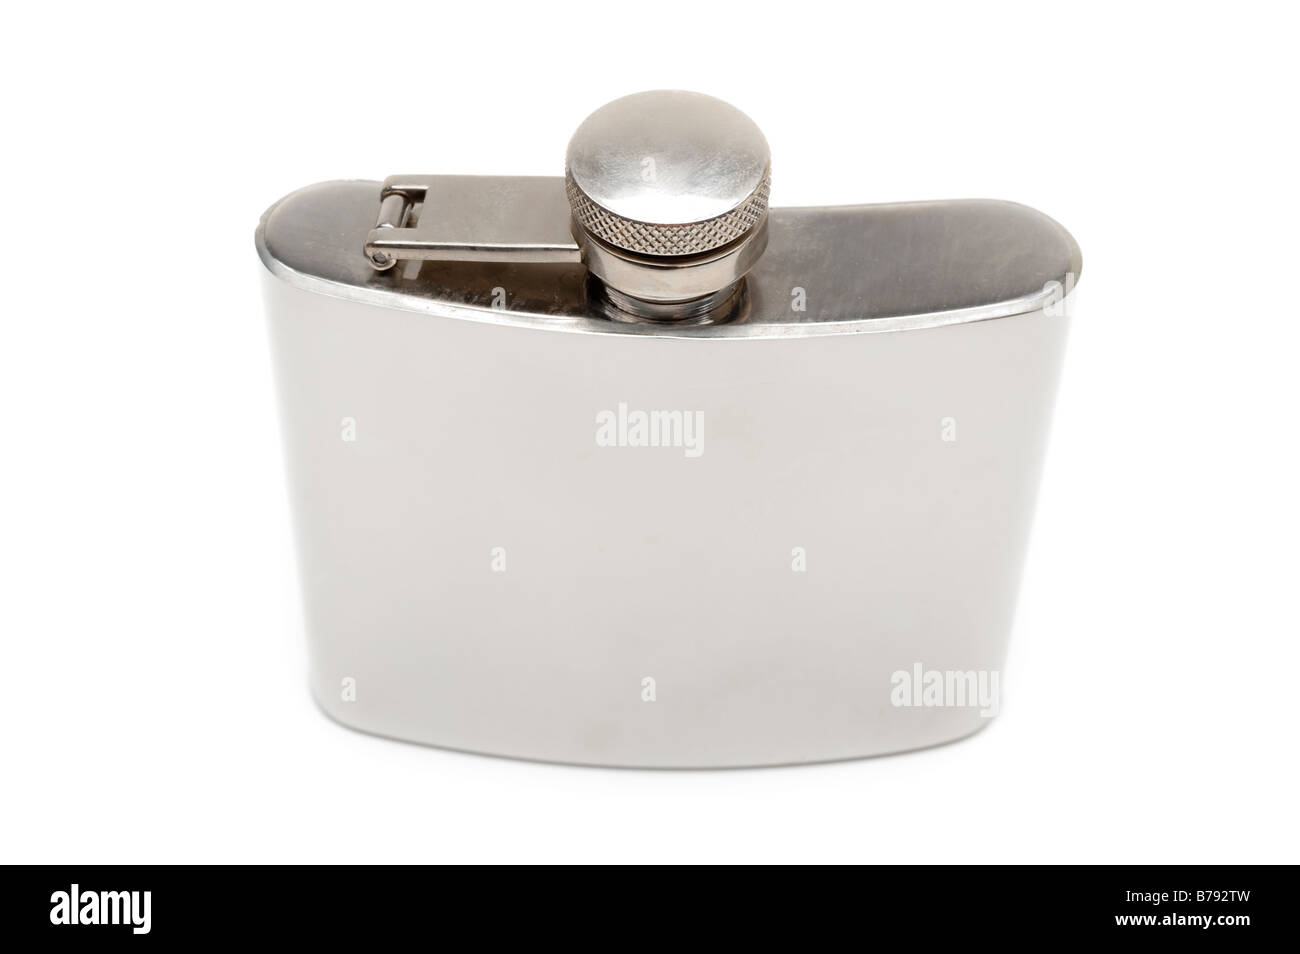 Stainless steel hip flask Stock Photo